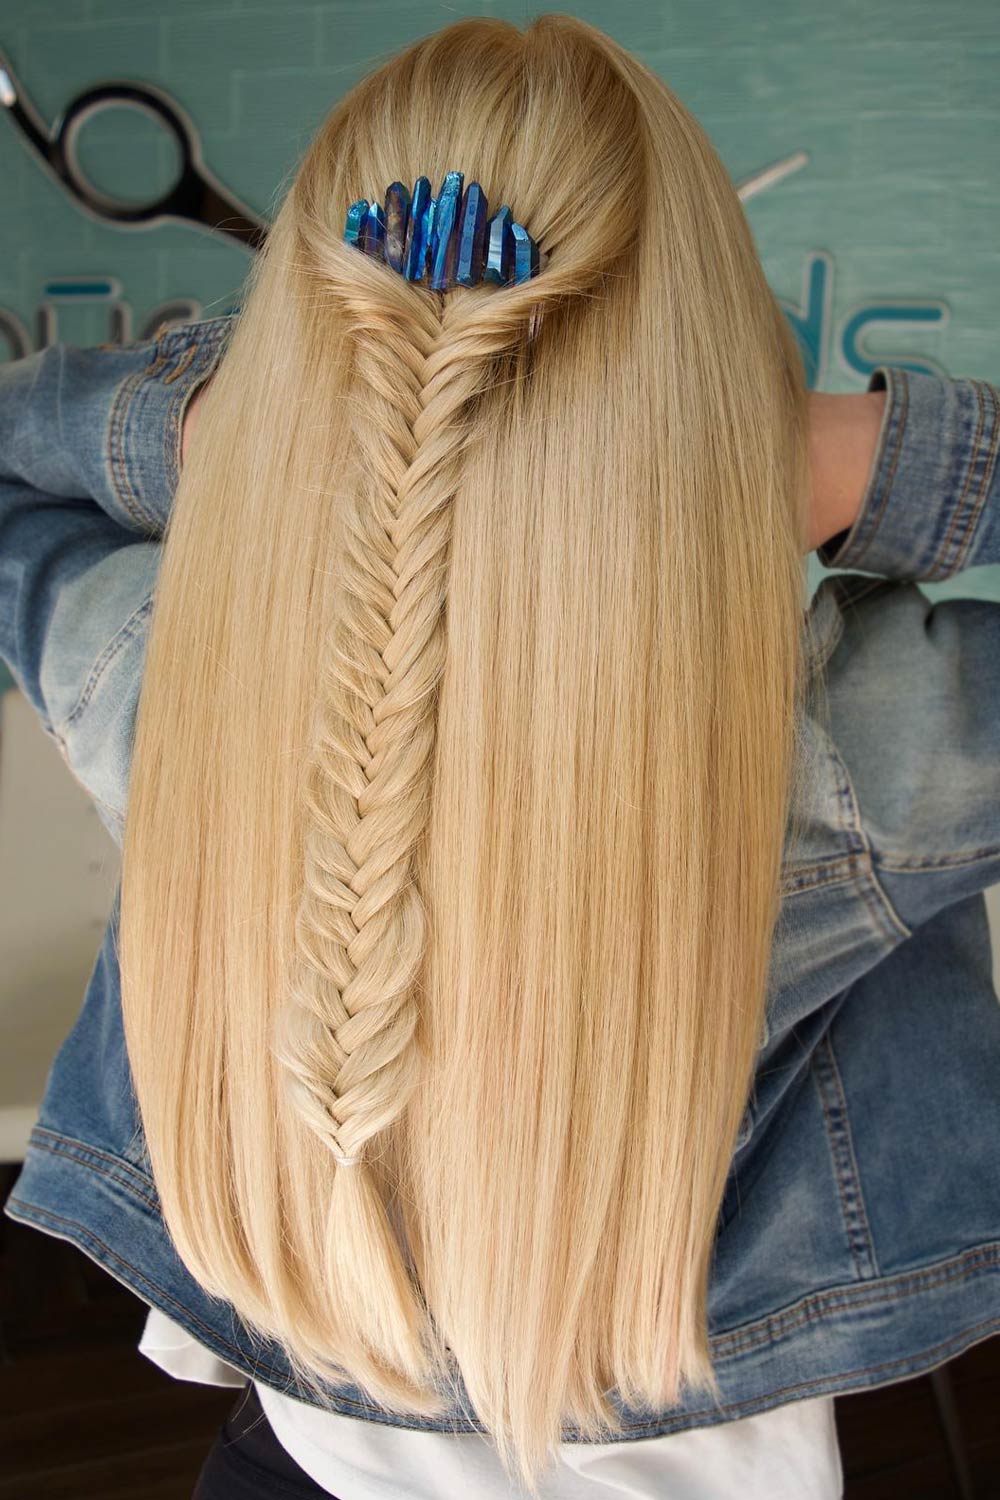 Braided Long Hair Embellished With Accessories